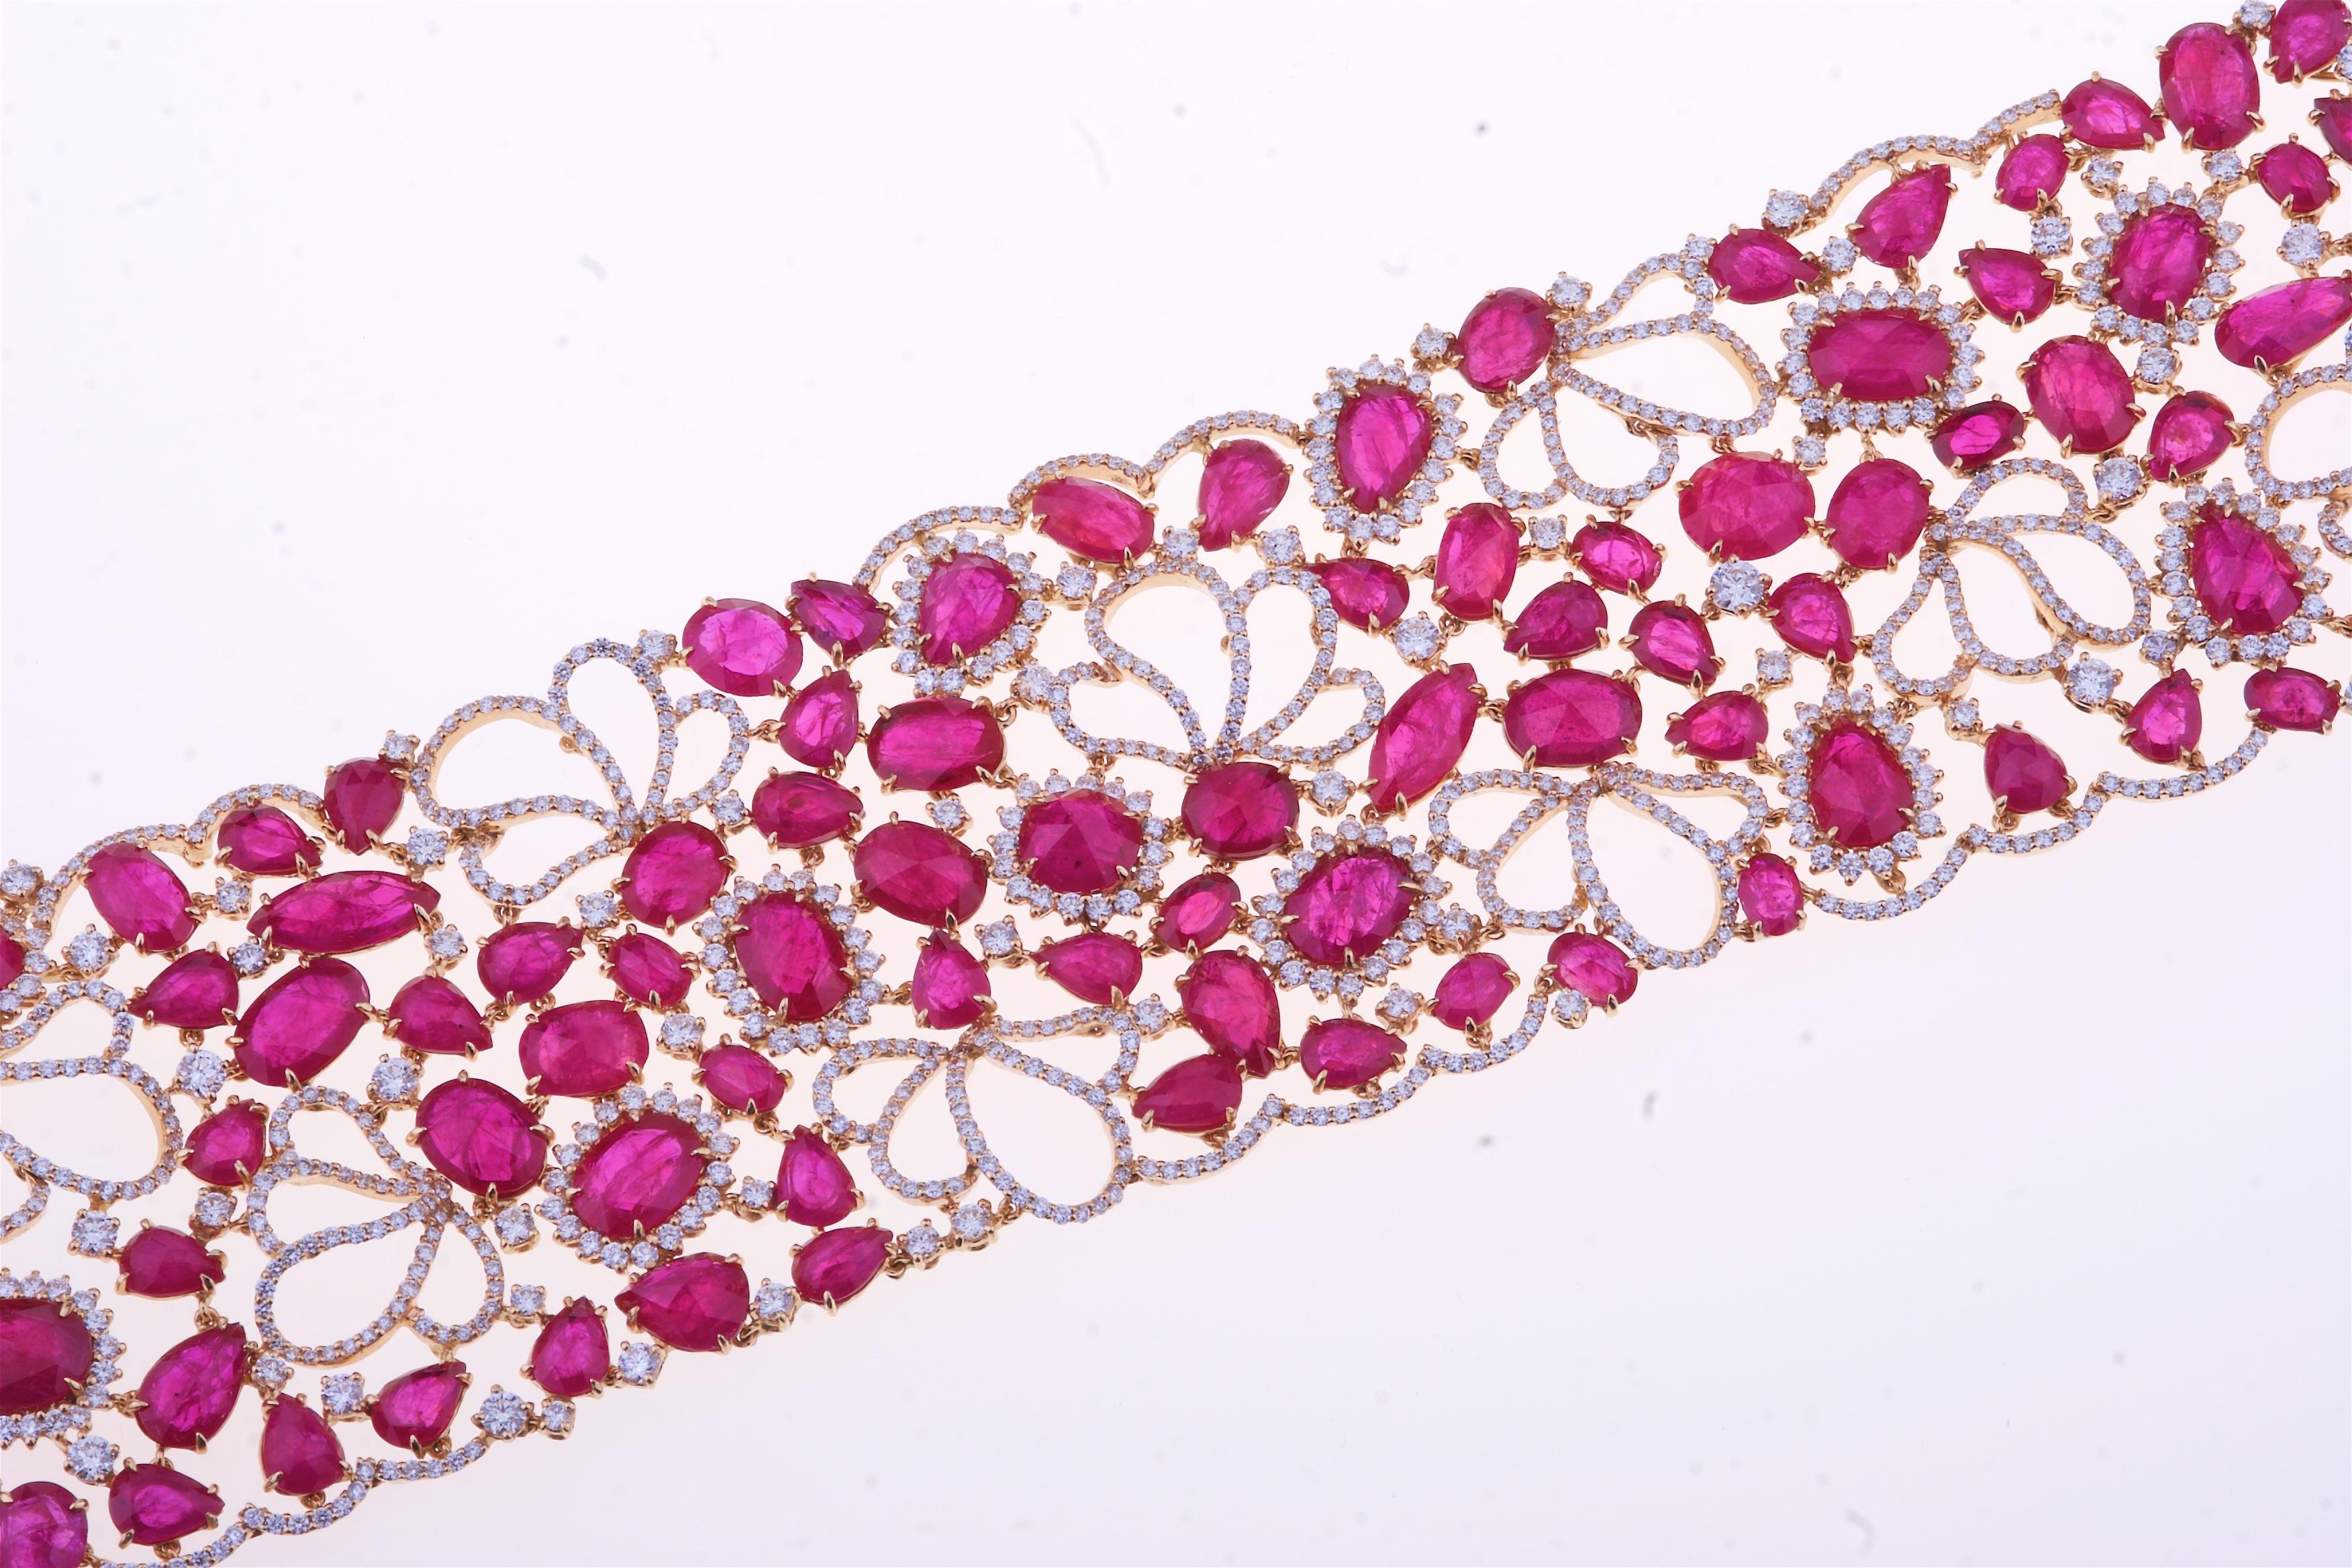 Stunning Band Bracelet with Ruby and Diamonds Flowers Design.
Tens of Brigt Ruby (ct. 78.40) on a Carpet of Flowers Mixed With Diamonds (G colour SI - ct. 13.13) for this Unique Piece.
Wholly Manufactured in Italy, by expert hands of goldsmiths who